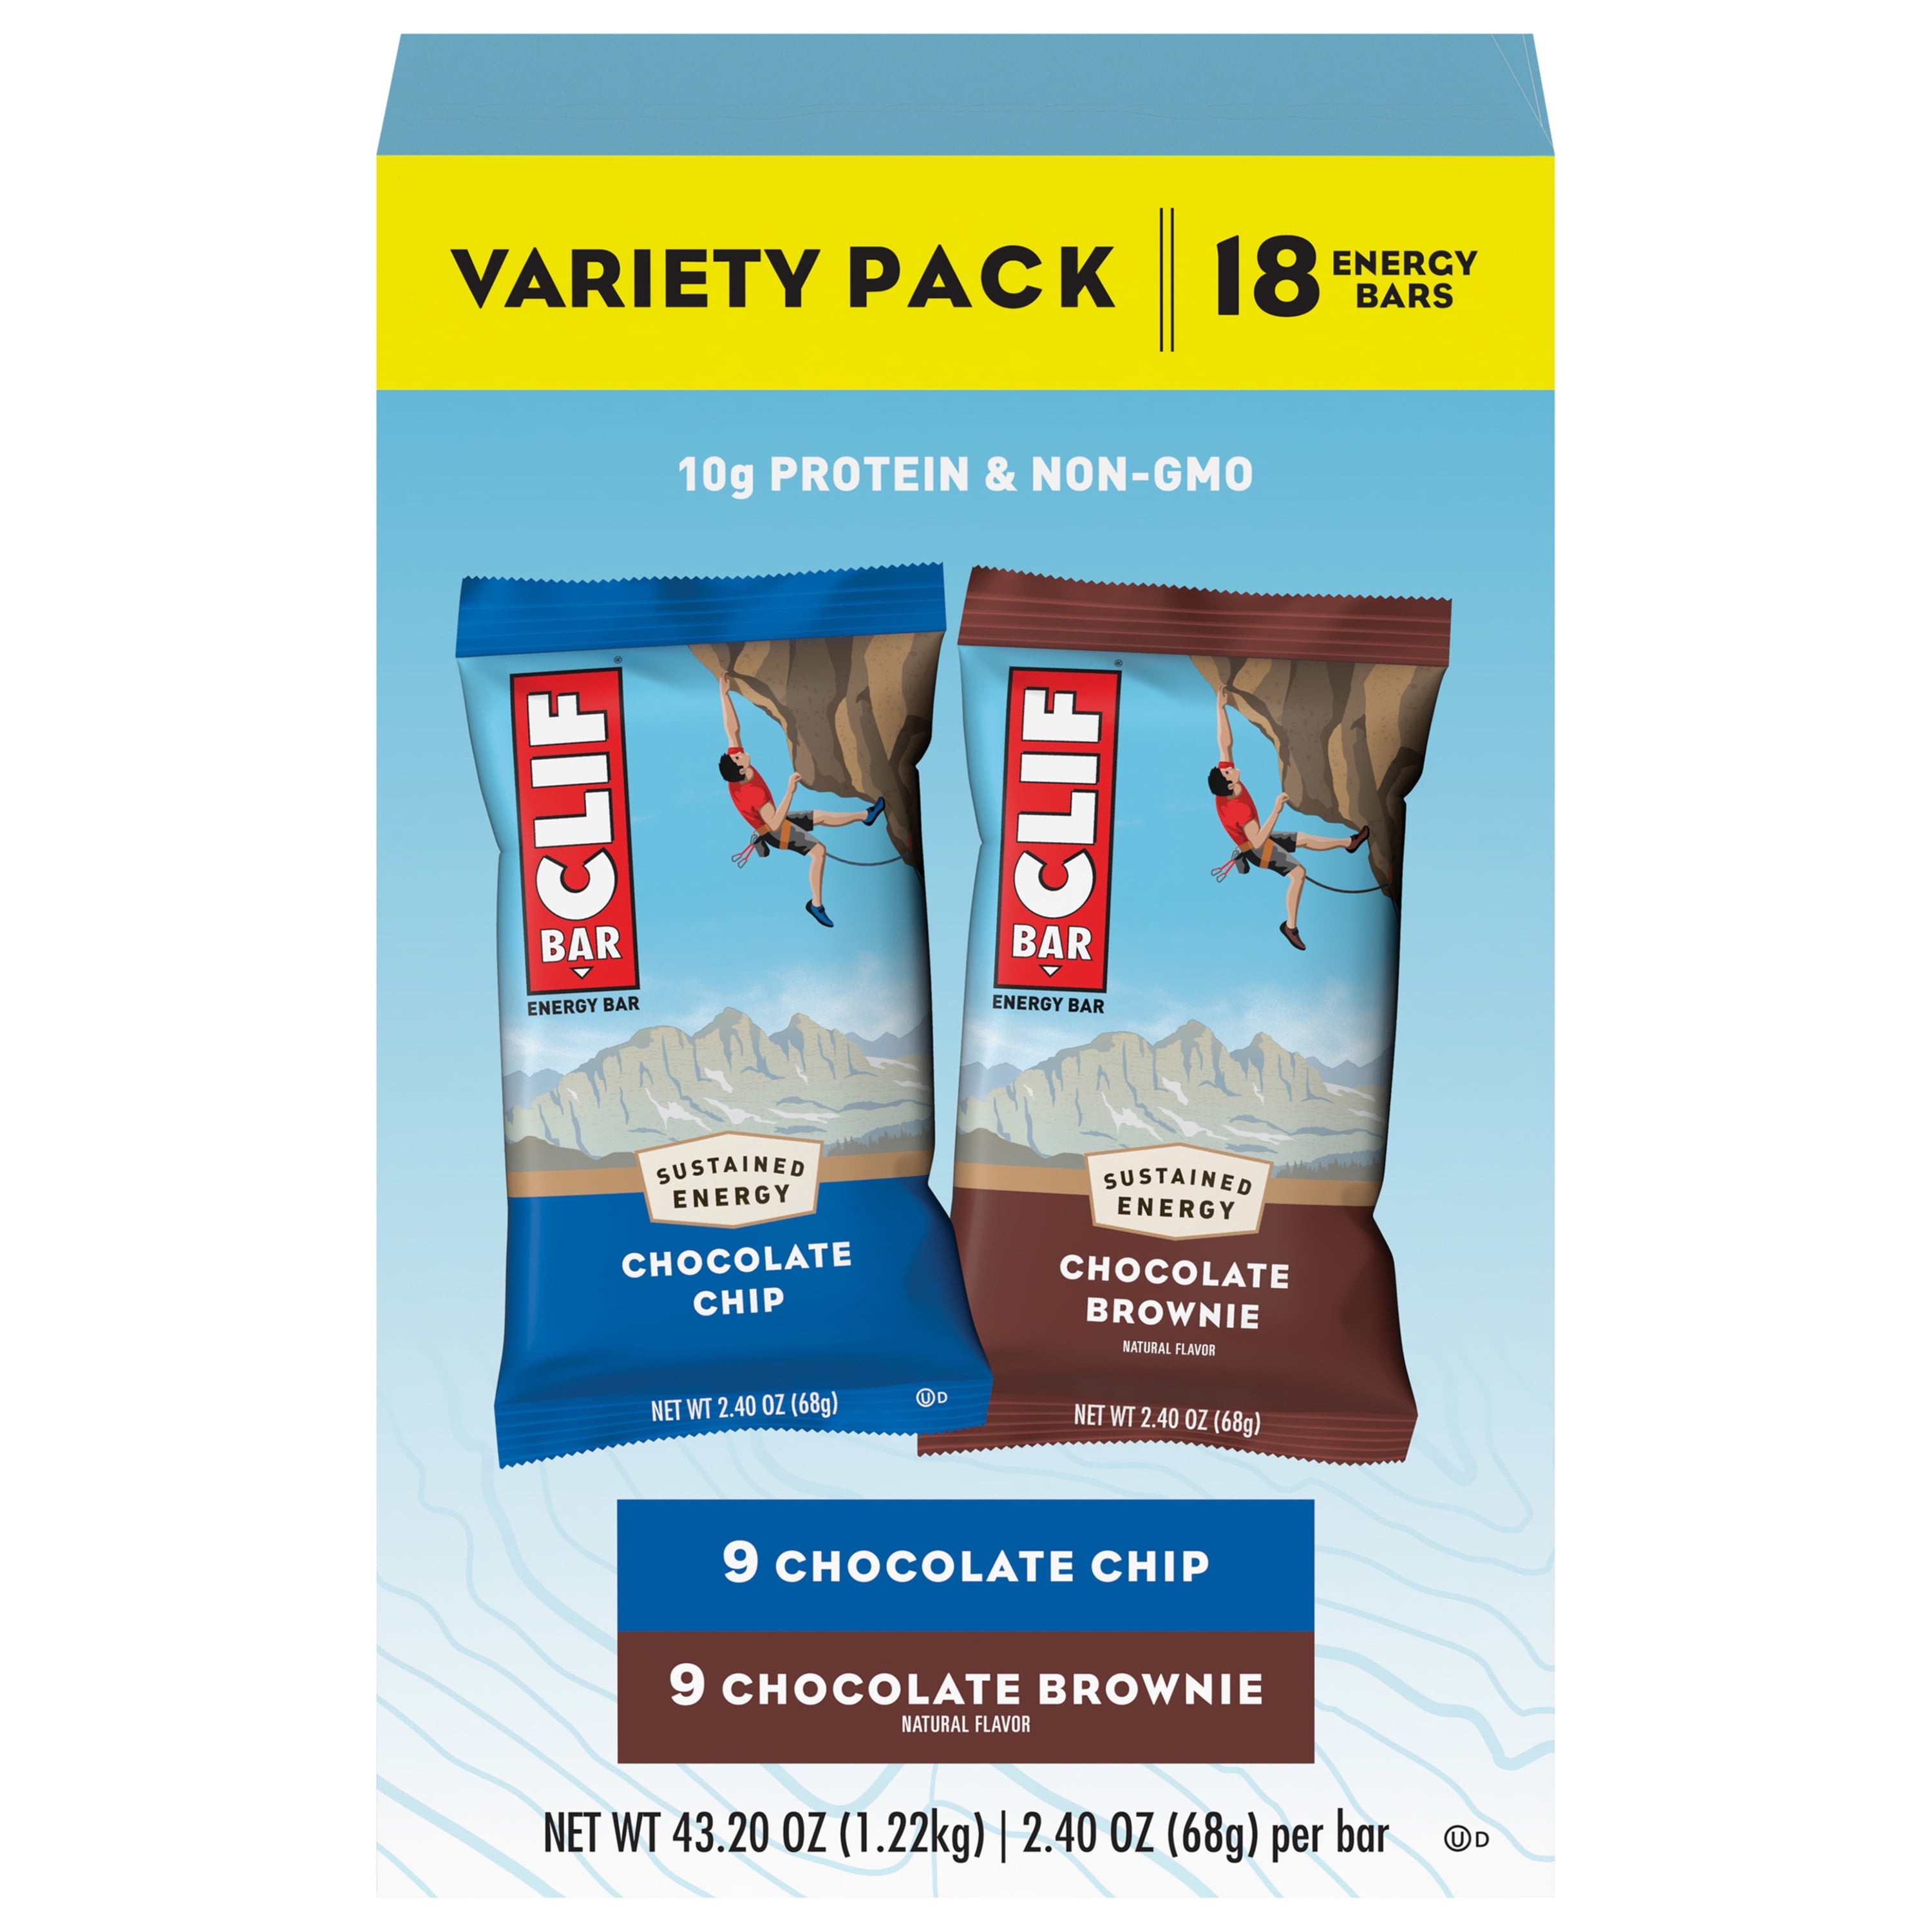 Clif Bar Energy Bar, Variety Pack, Chocolate Chip, Chocolate Brownie, 10g Protein Bar, 18 Ct, 2.4 oz